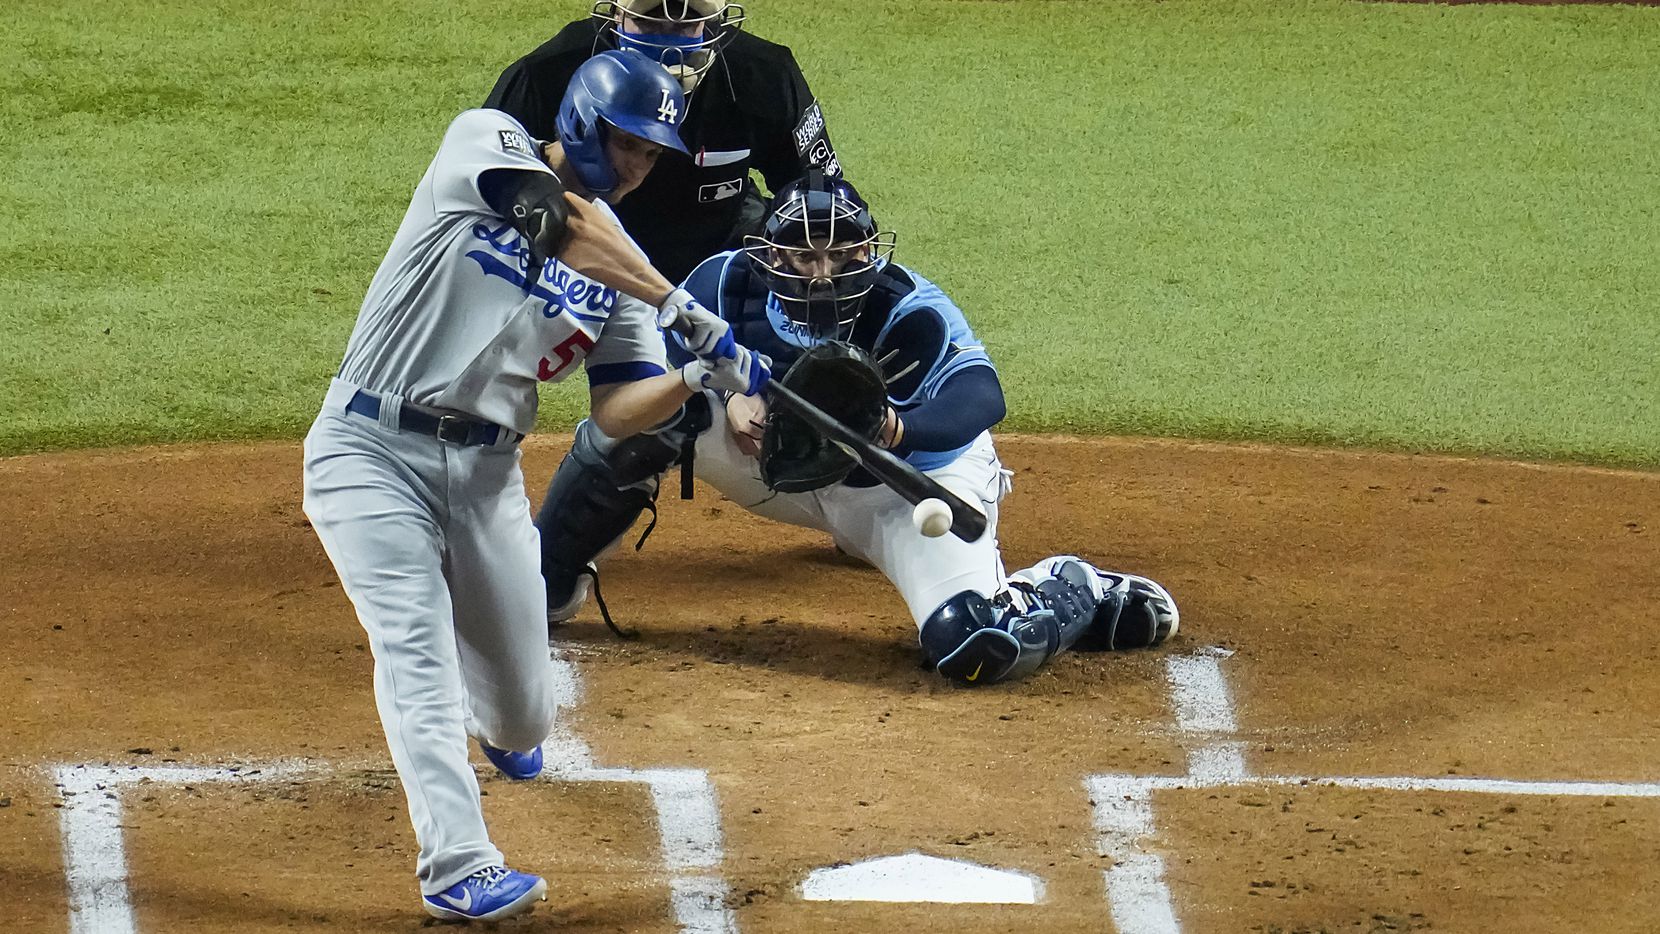 Los Angeles Dodgers shortstop Corey Seager drives in a run with a single as Tampa Bay Rays catcher Mike Zunino works behind the plate during the first inning Game 5 of the World Series at Globe Life Field on Sunday, Oct. 25, 2020. 